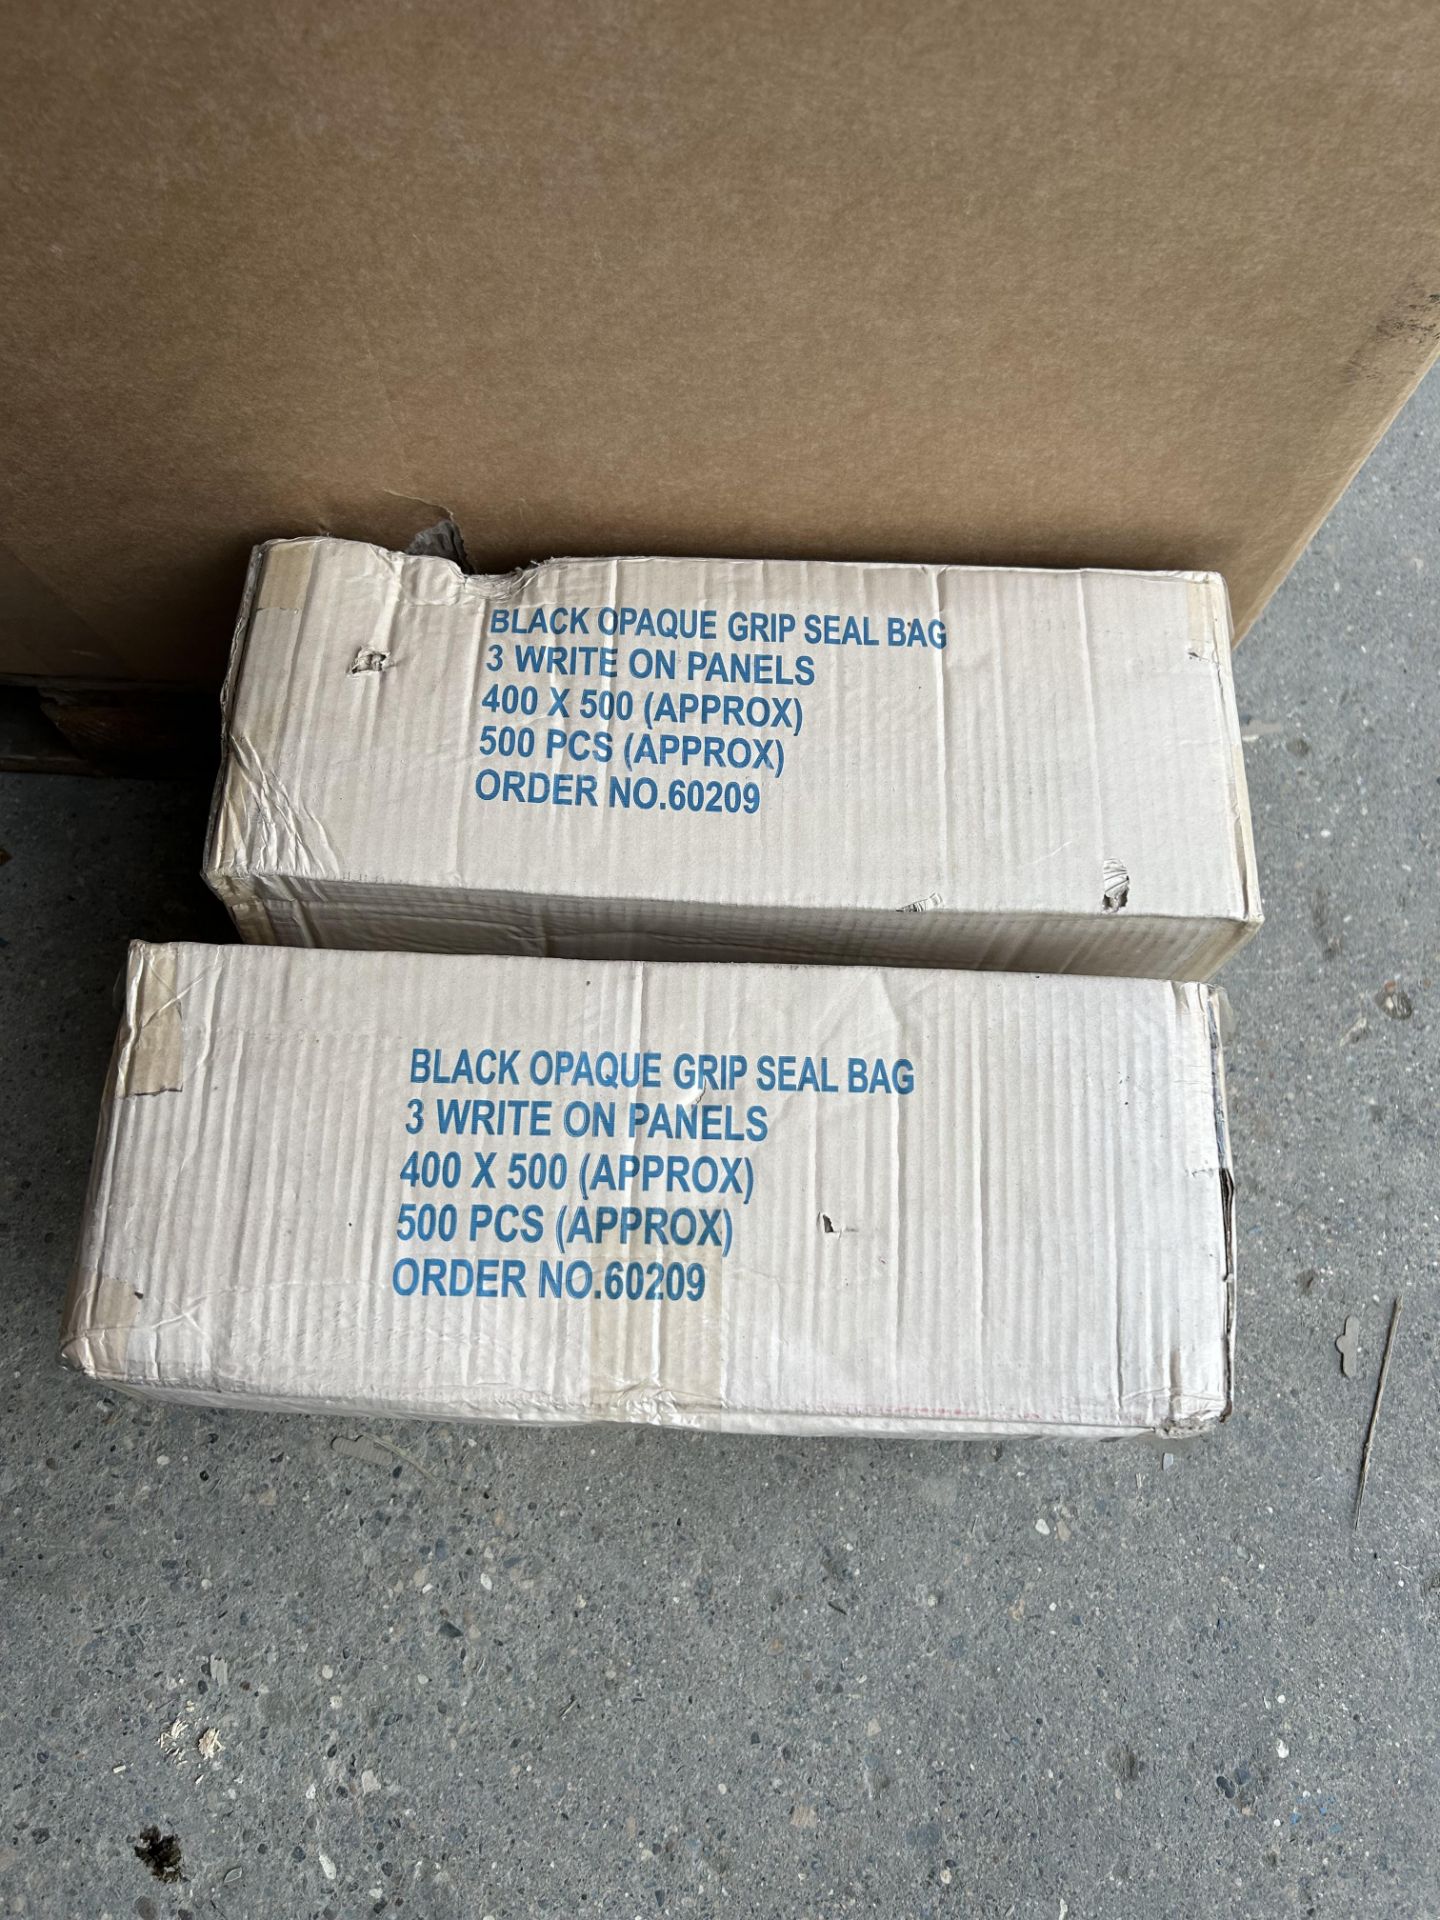 2 BOXES OF BLACK OPAQUE GRIP SEAL BAGS PACKAGING WITH 3 WRITE ON PANELS (EACH BOX CONTAINS 500)